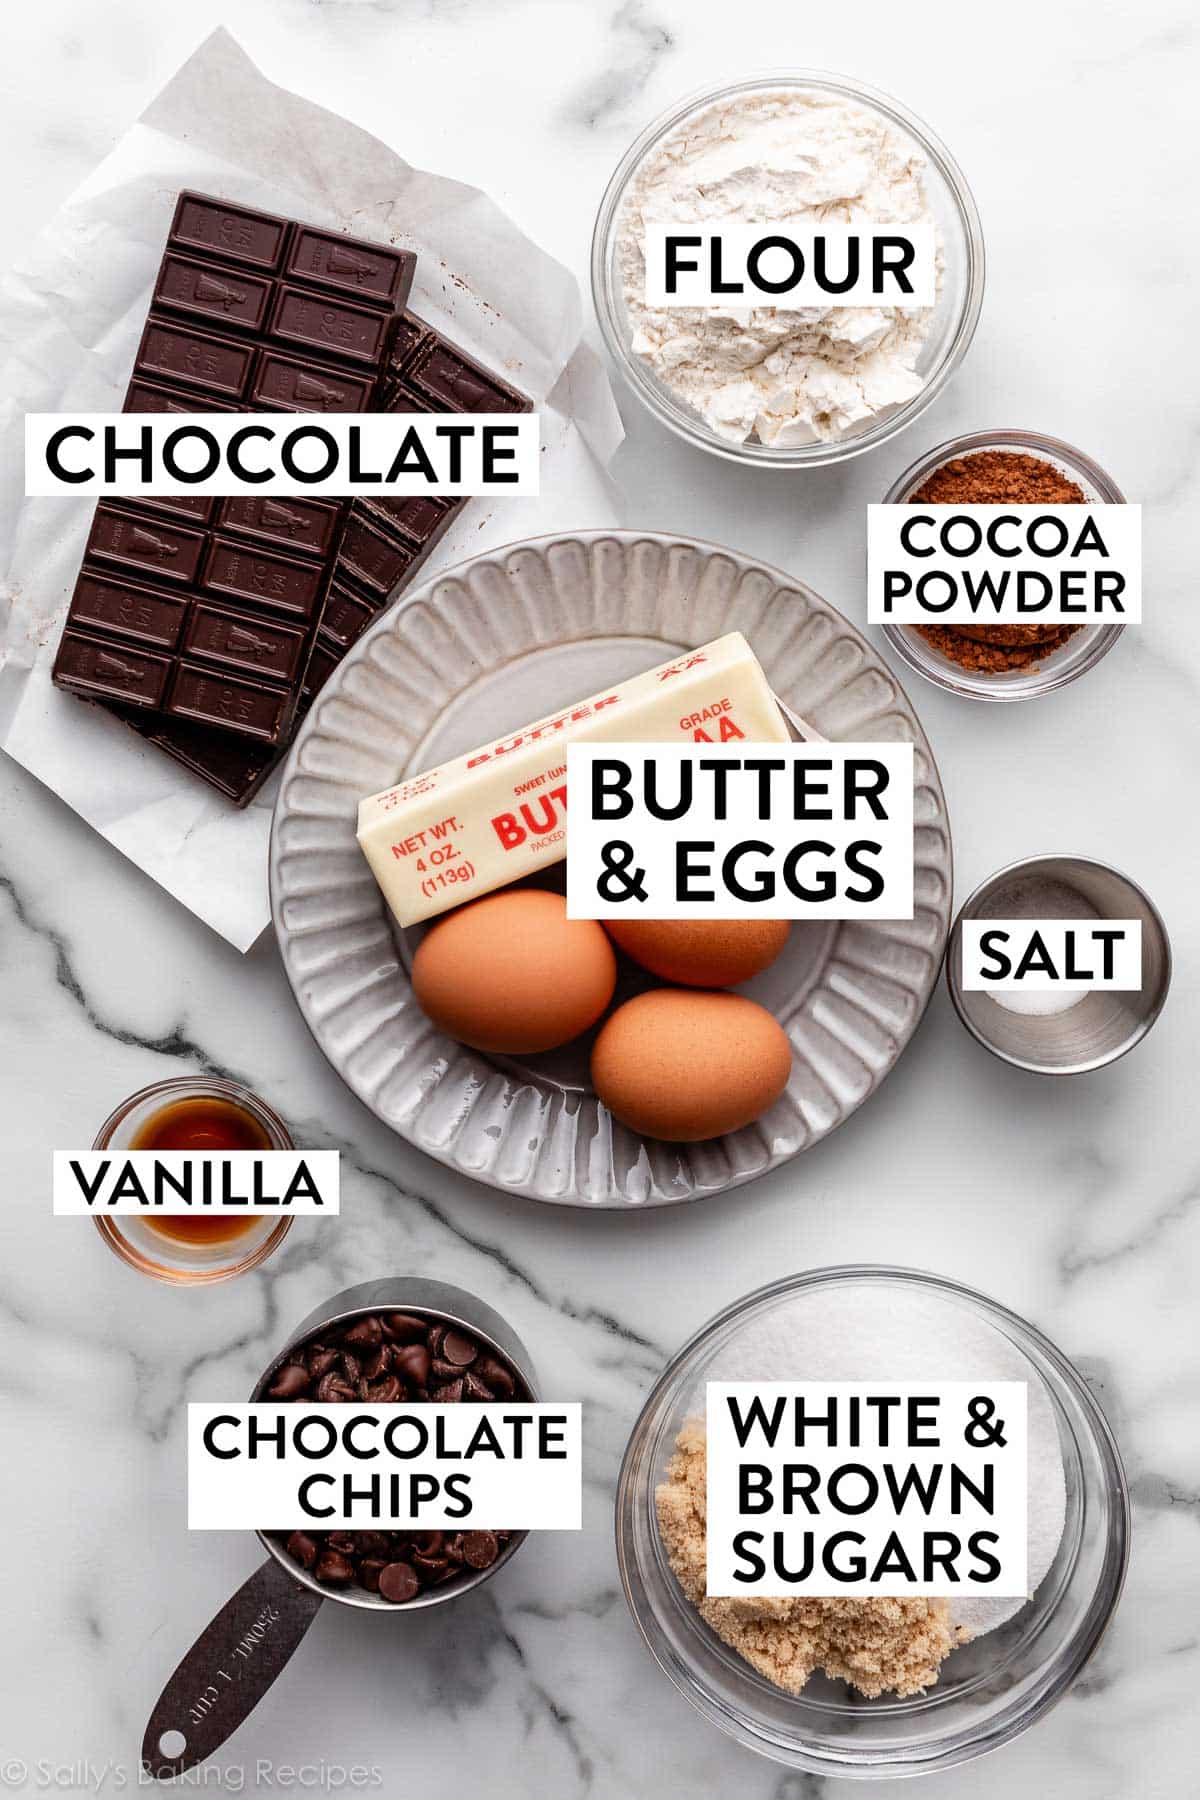 ingredients on counter including butter, eggs, chocolate, flour, and cocoa powder.